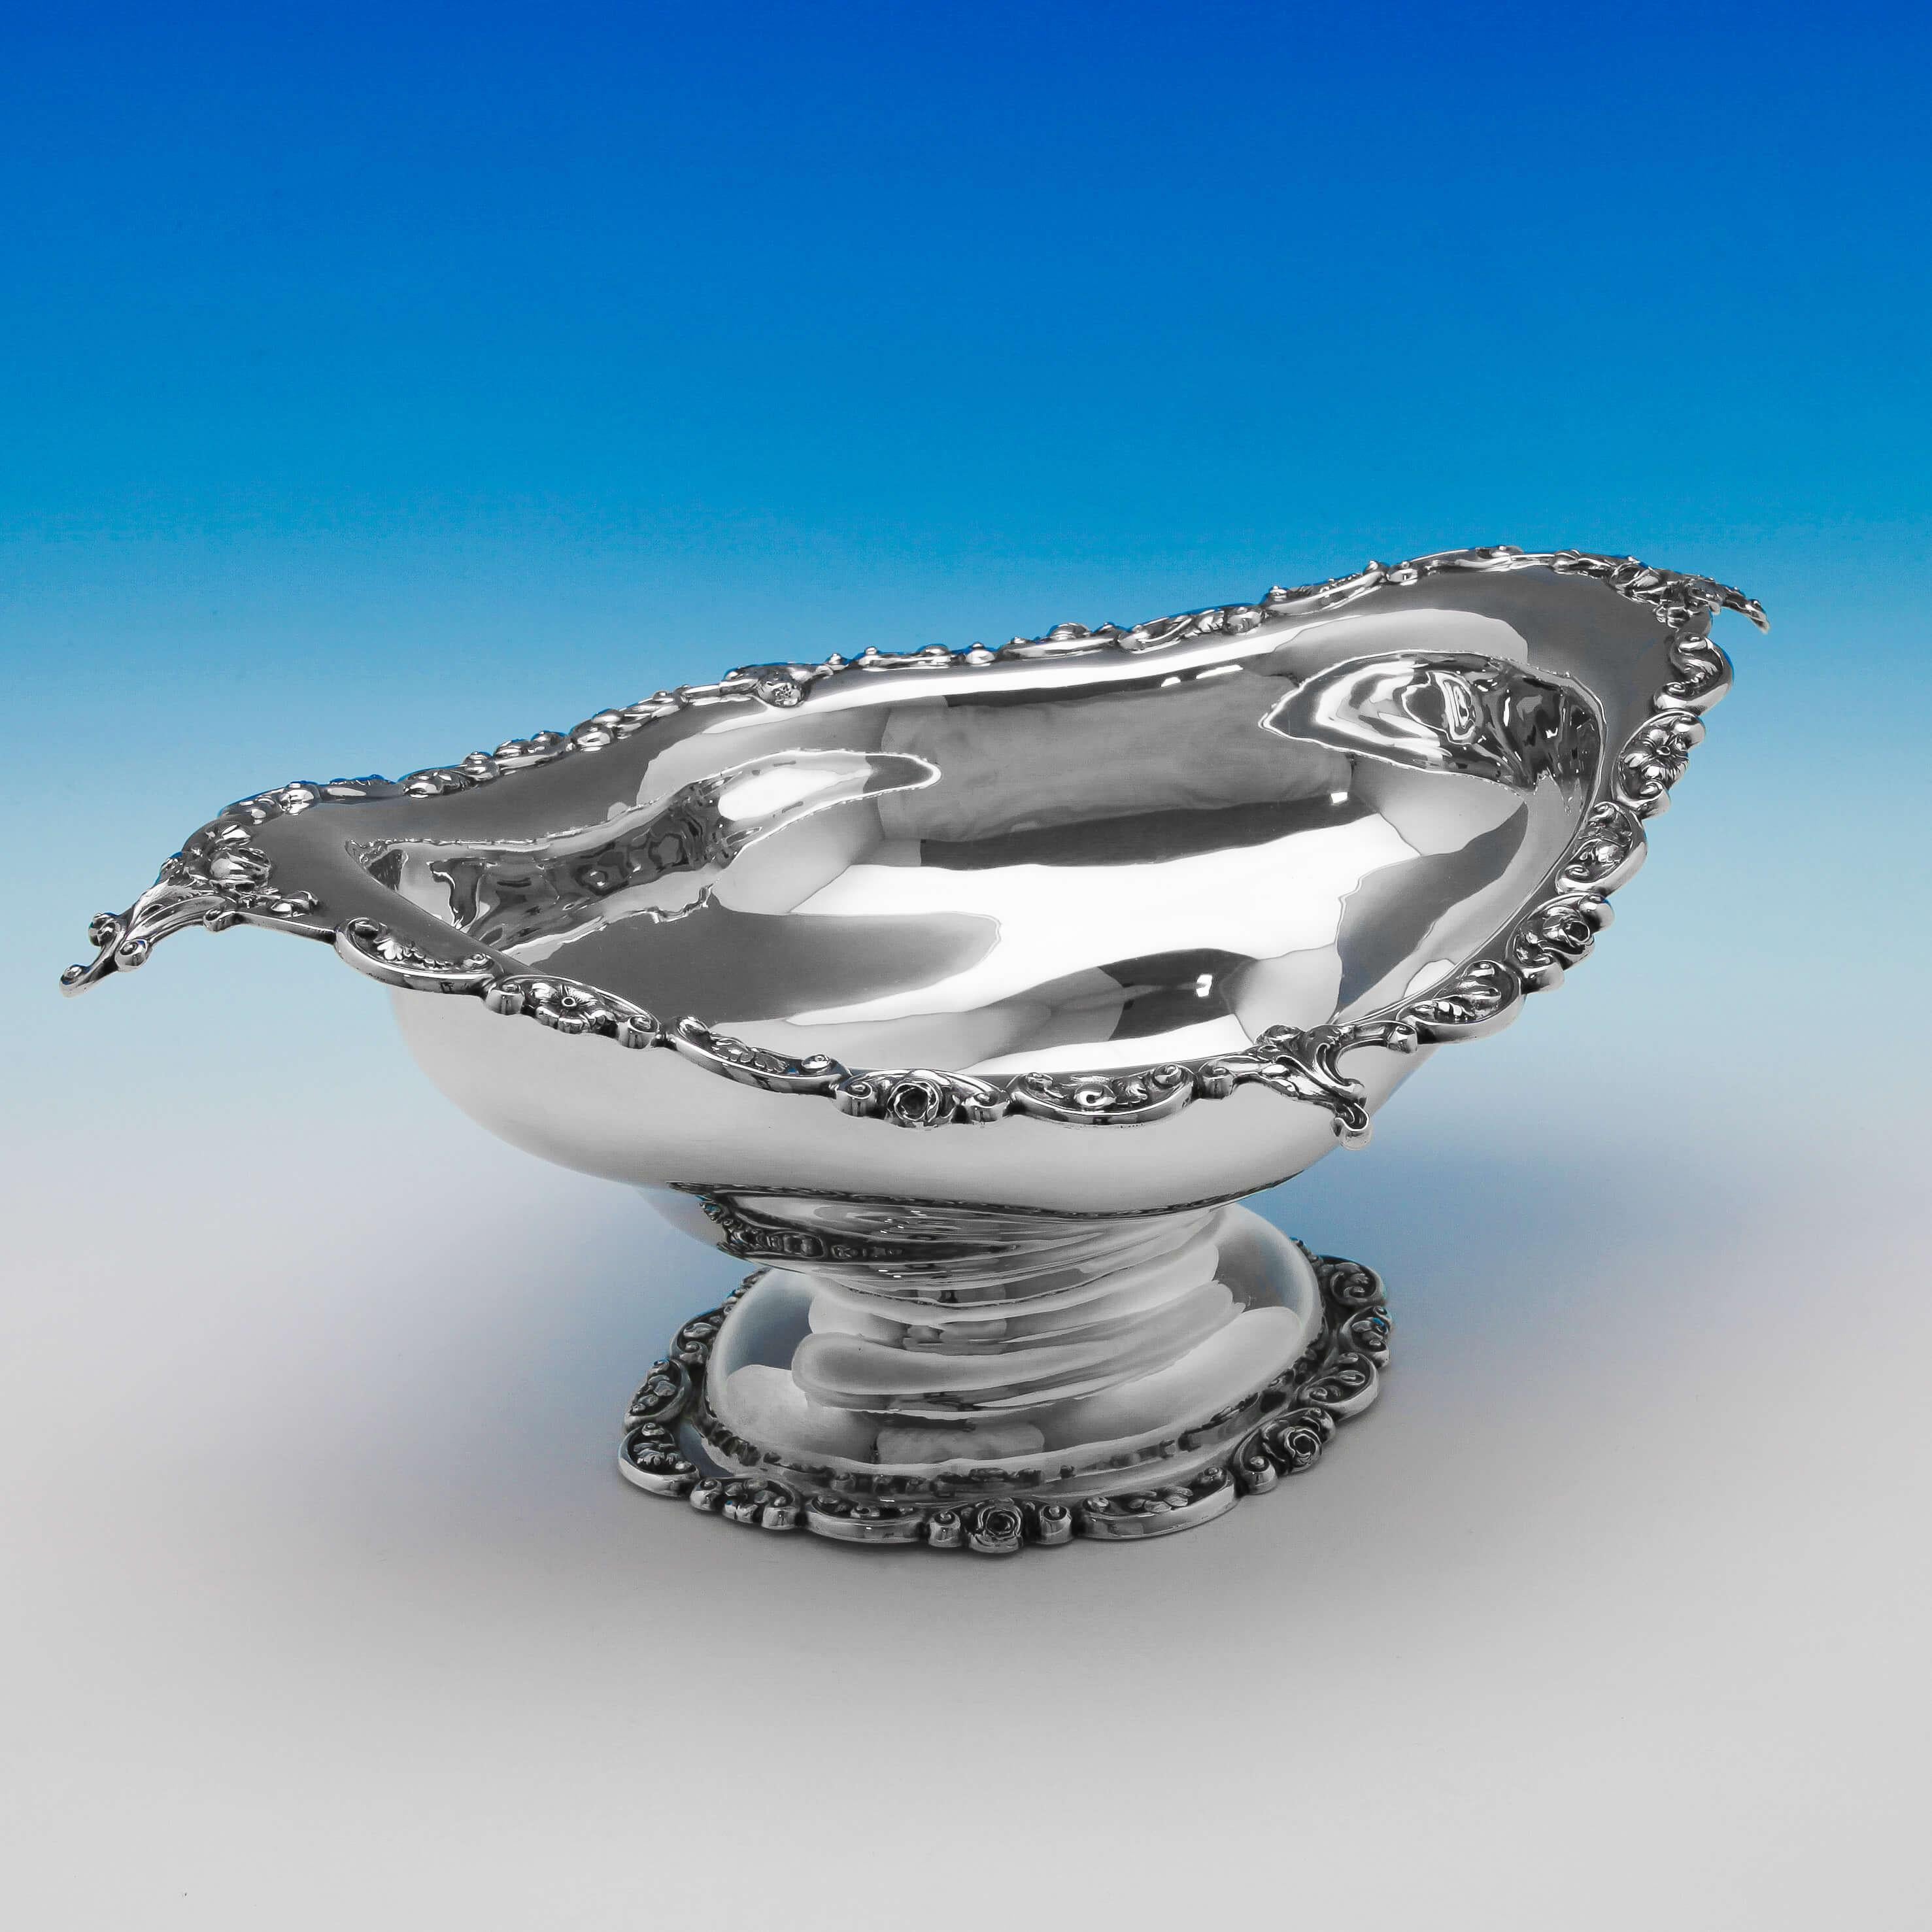 Hallmarked in Sheffield, 1909 by C. C. Pilling, this striking, antique sterling silver bowl, stands on a pedestal foot, and features ornate shell, acanthus and scroll decorated borders. The bowl measures: 6.25 inches (16cm) tall, by 16 inches